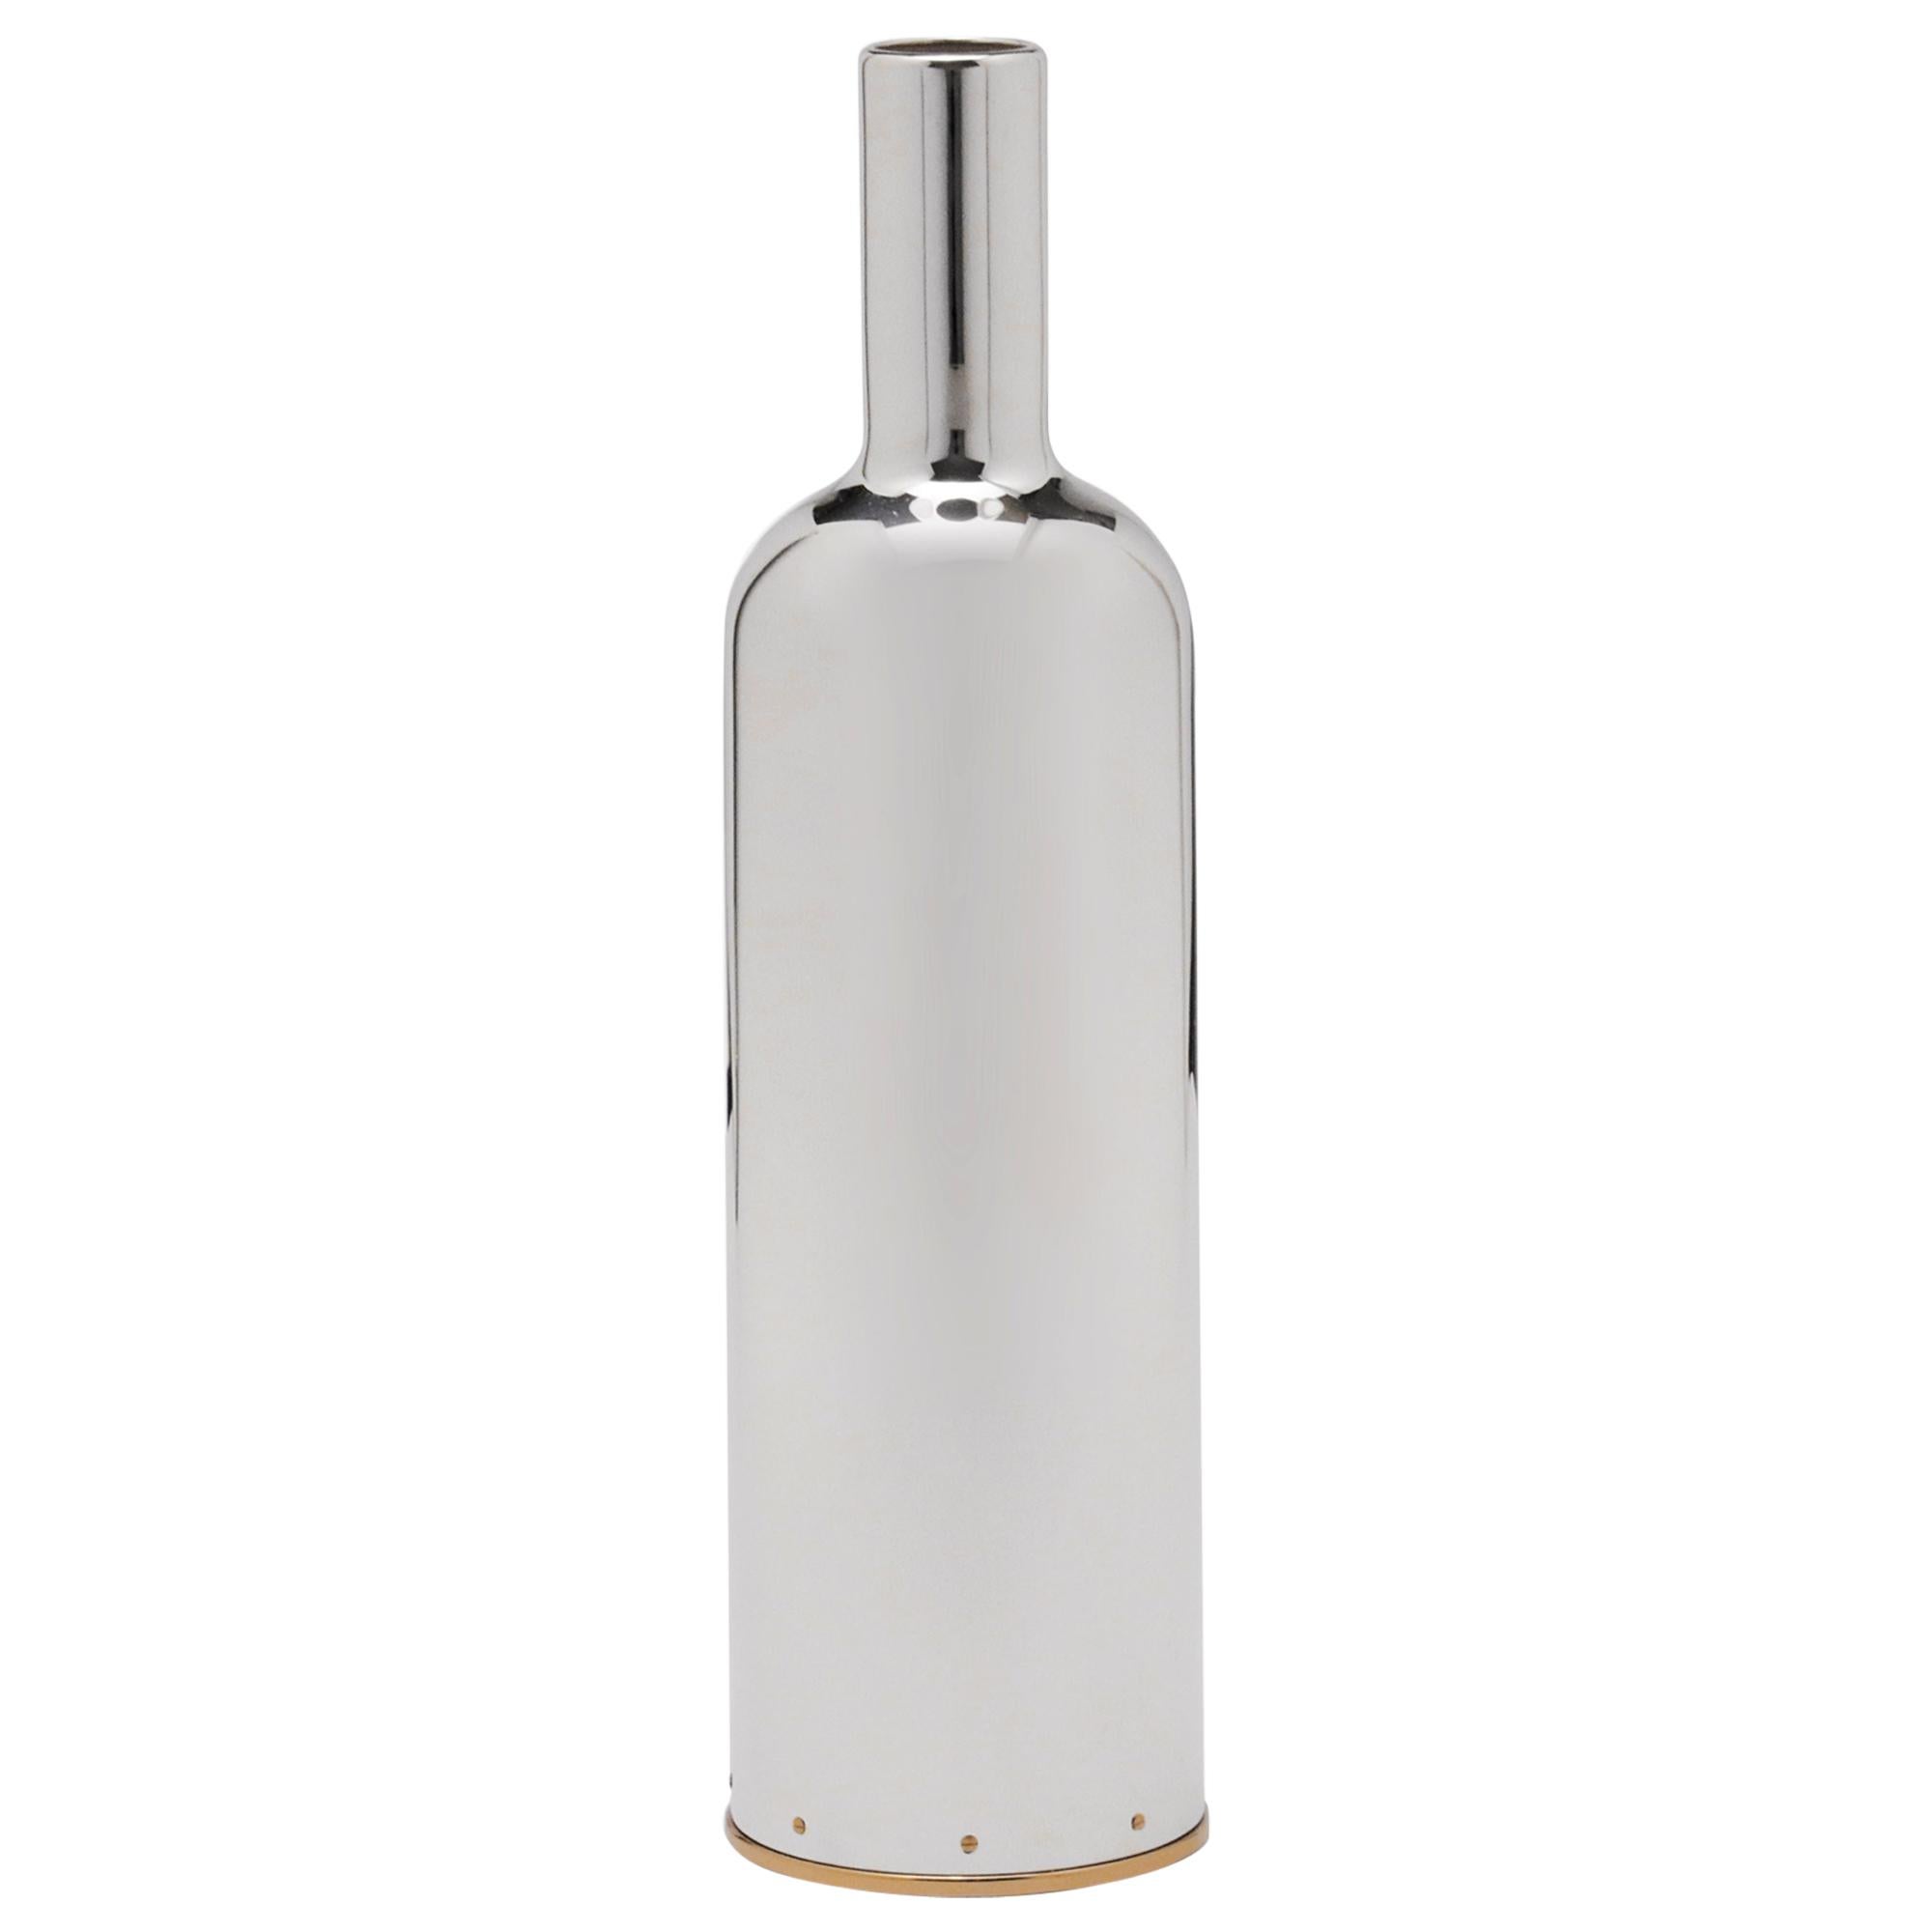 Wine cover, Solid pure silver, Silver, 2018, Italy, in stock